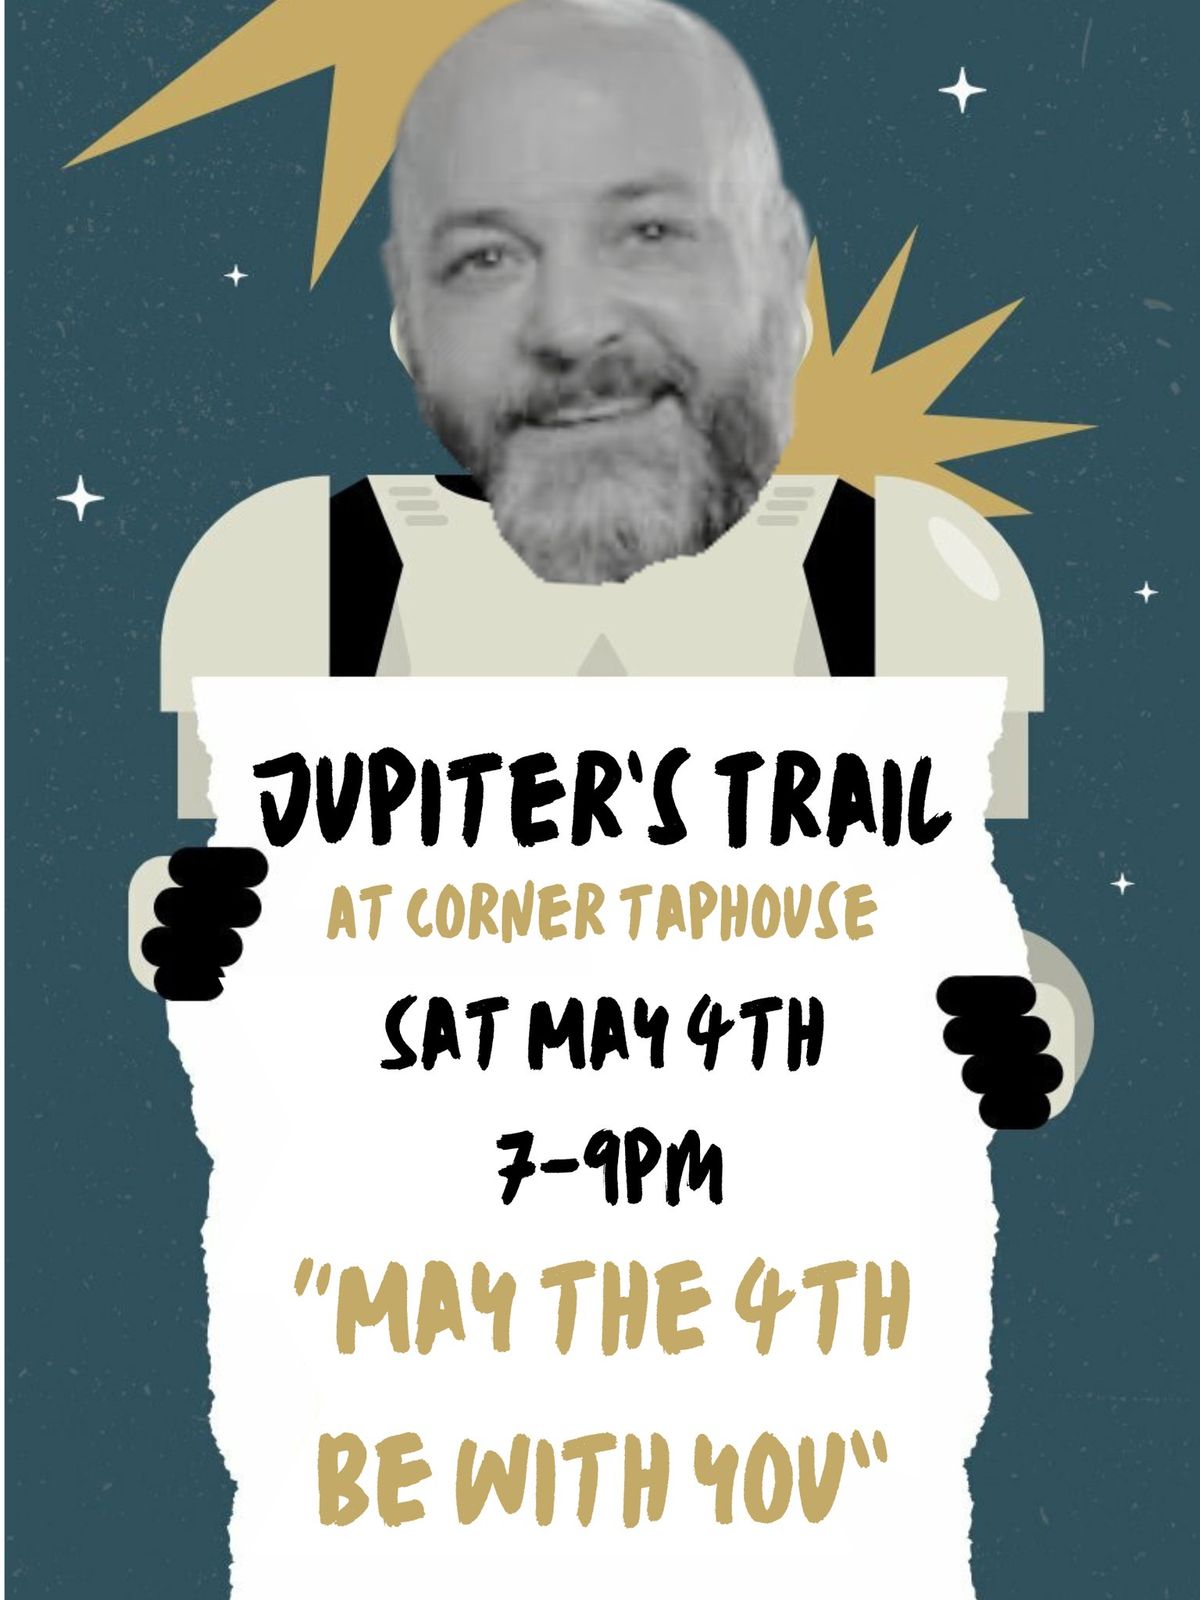 May the 4th Concert- Jupiters Trail 